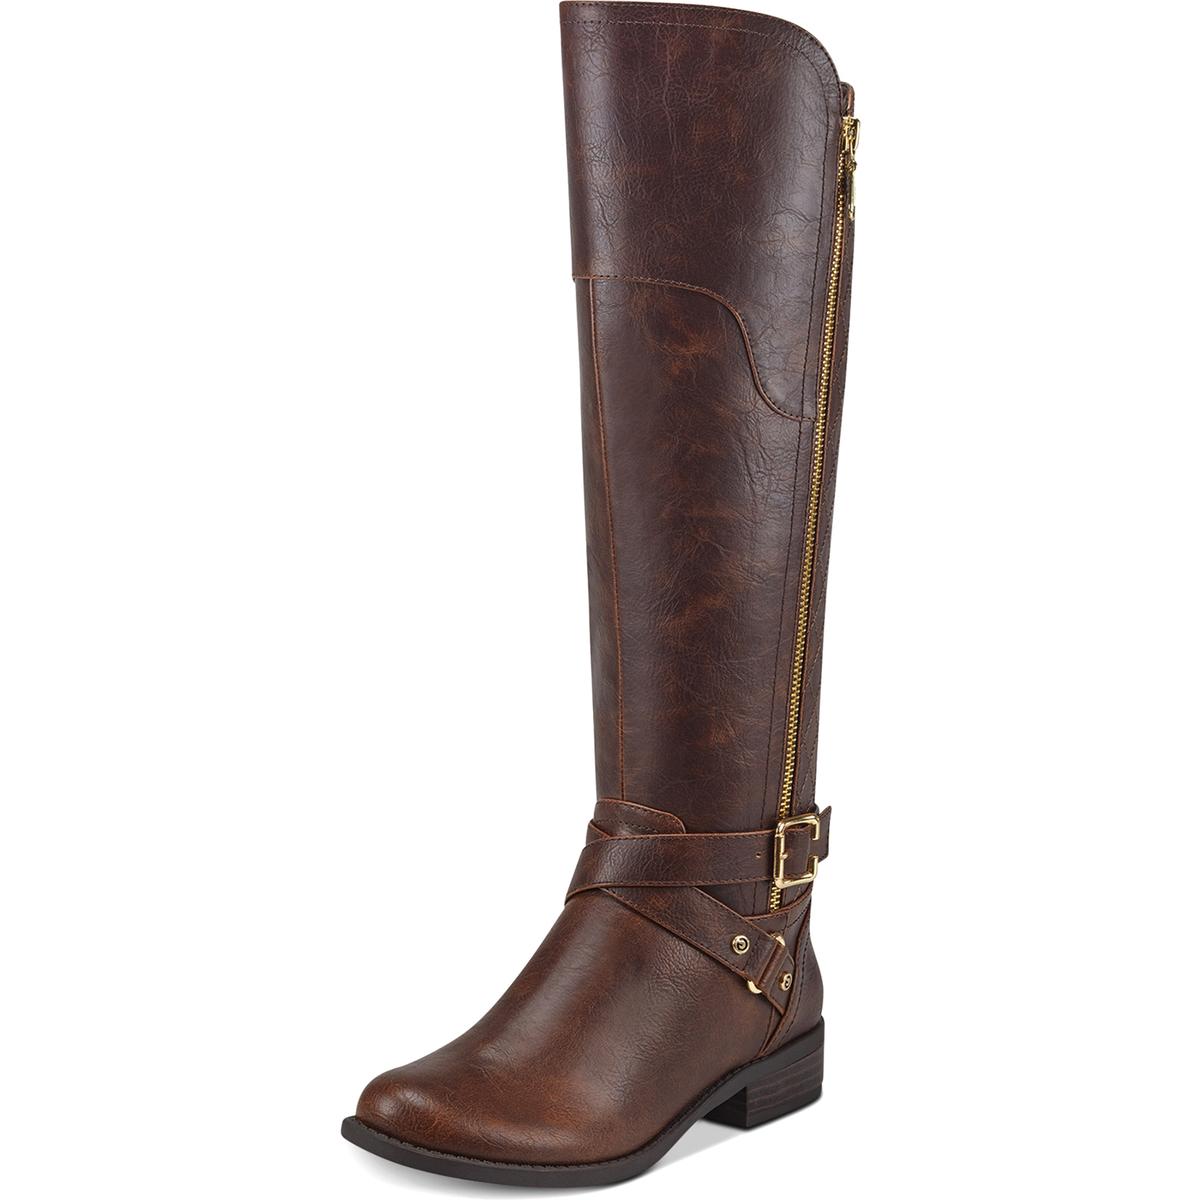 G by Guess Womens Haydin Brown Tall Riding Boots Shoes 5 Medium (B,M ...